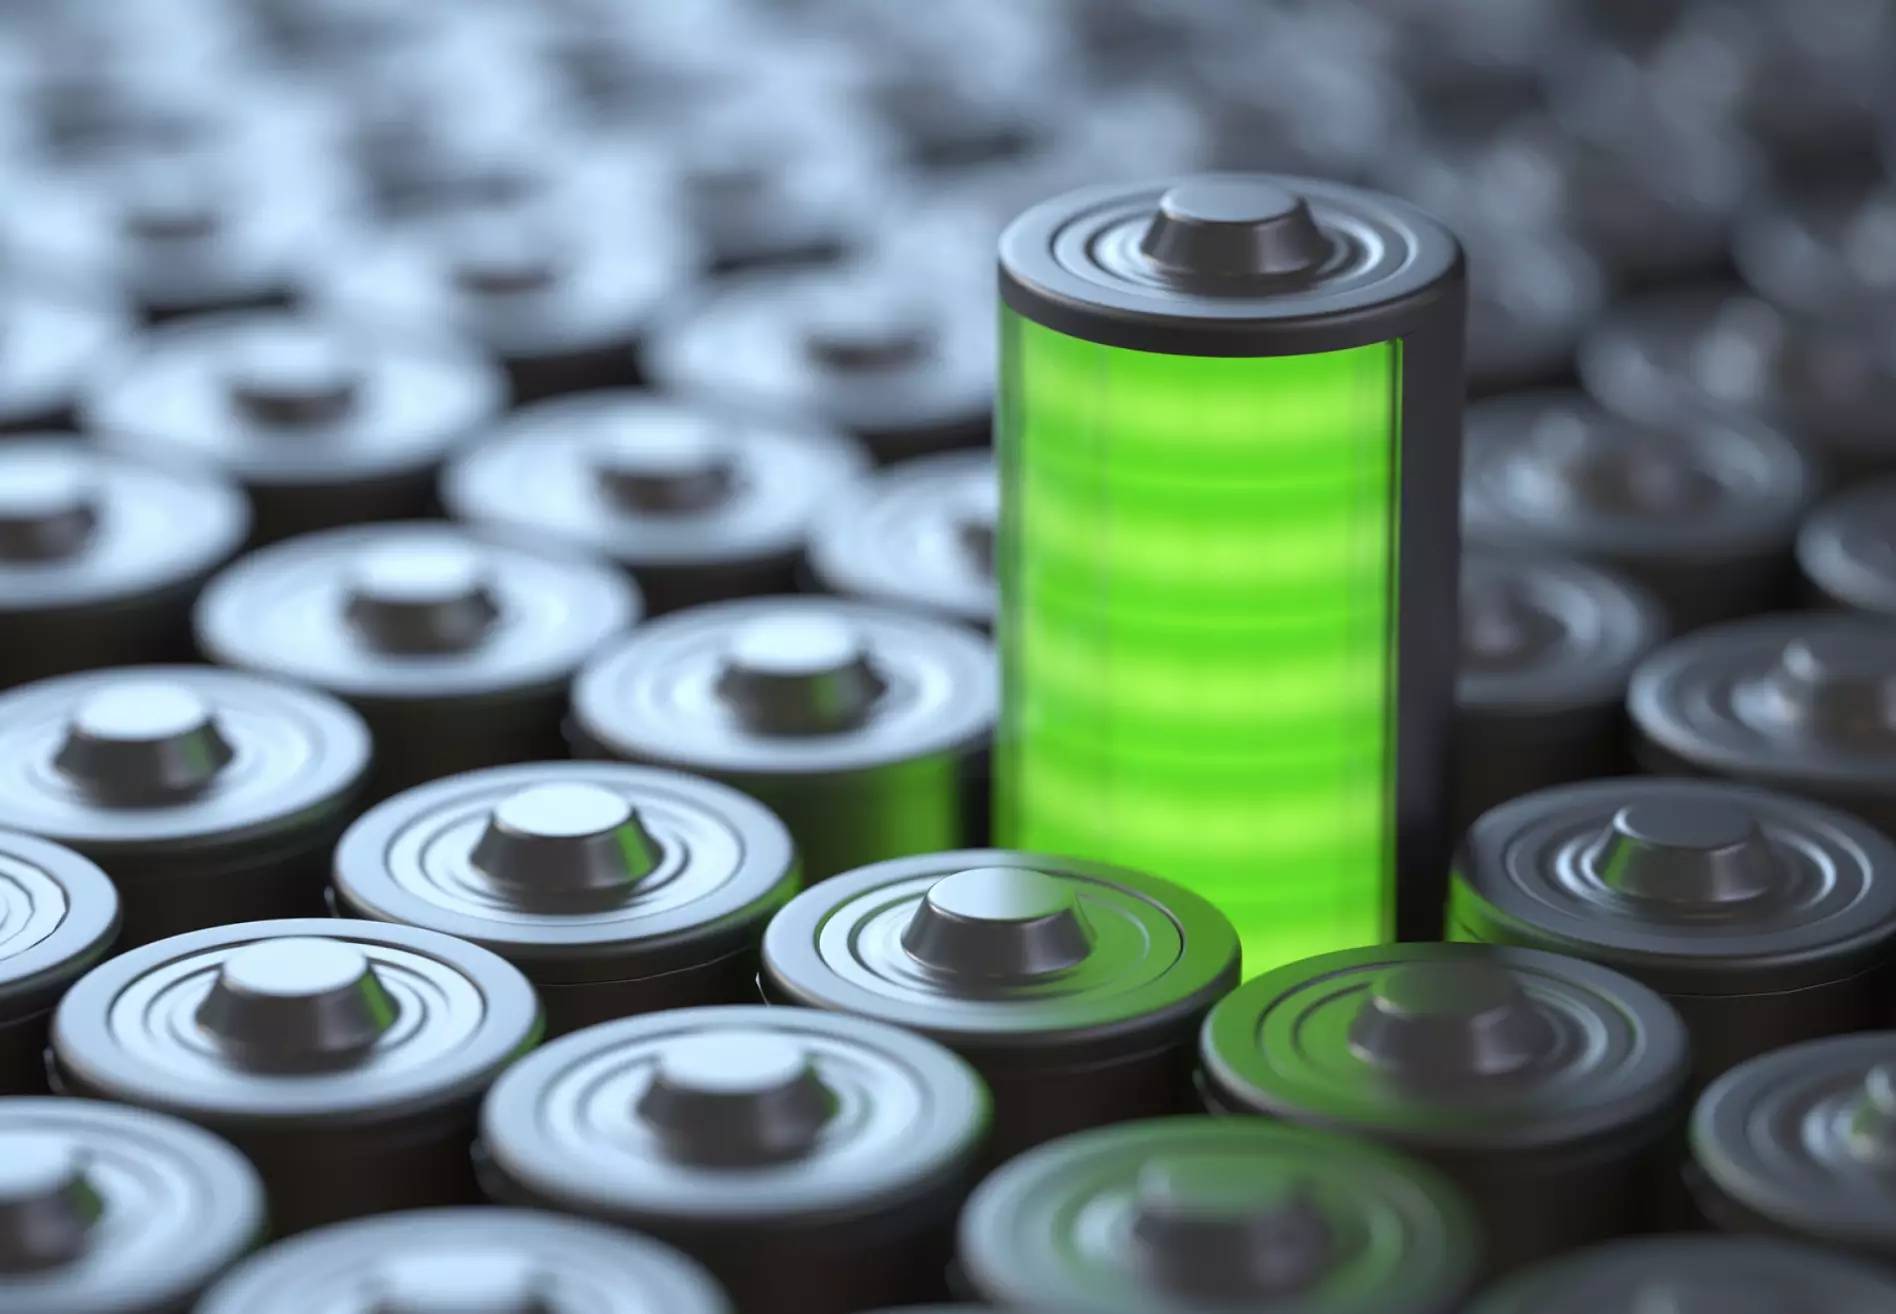 How long can energy be stored in commercial battery storage systems?